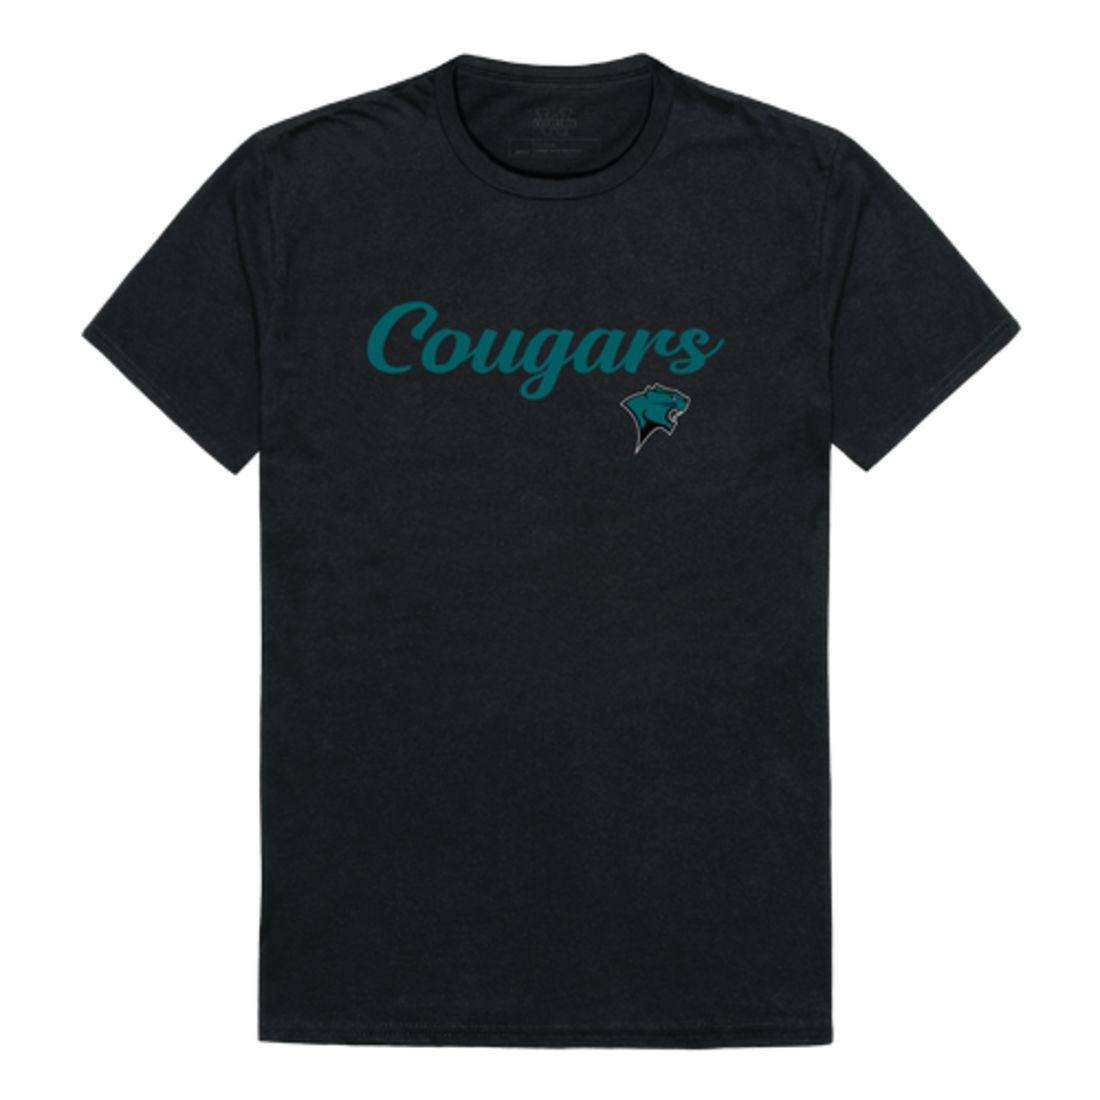 Chicago State University Cougars Script T-Shirt Tee